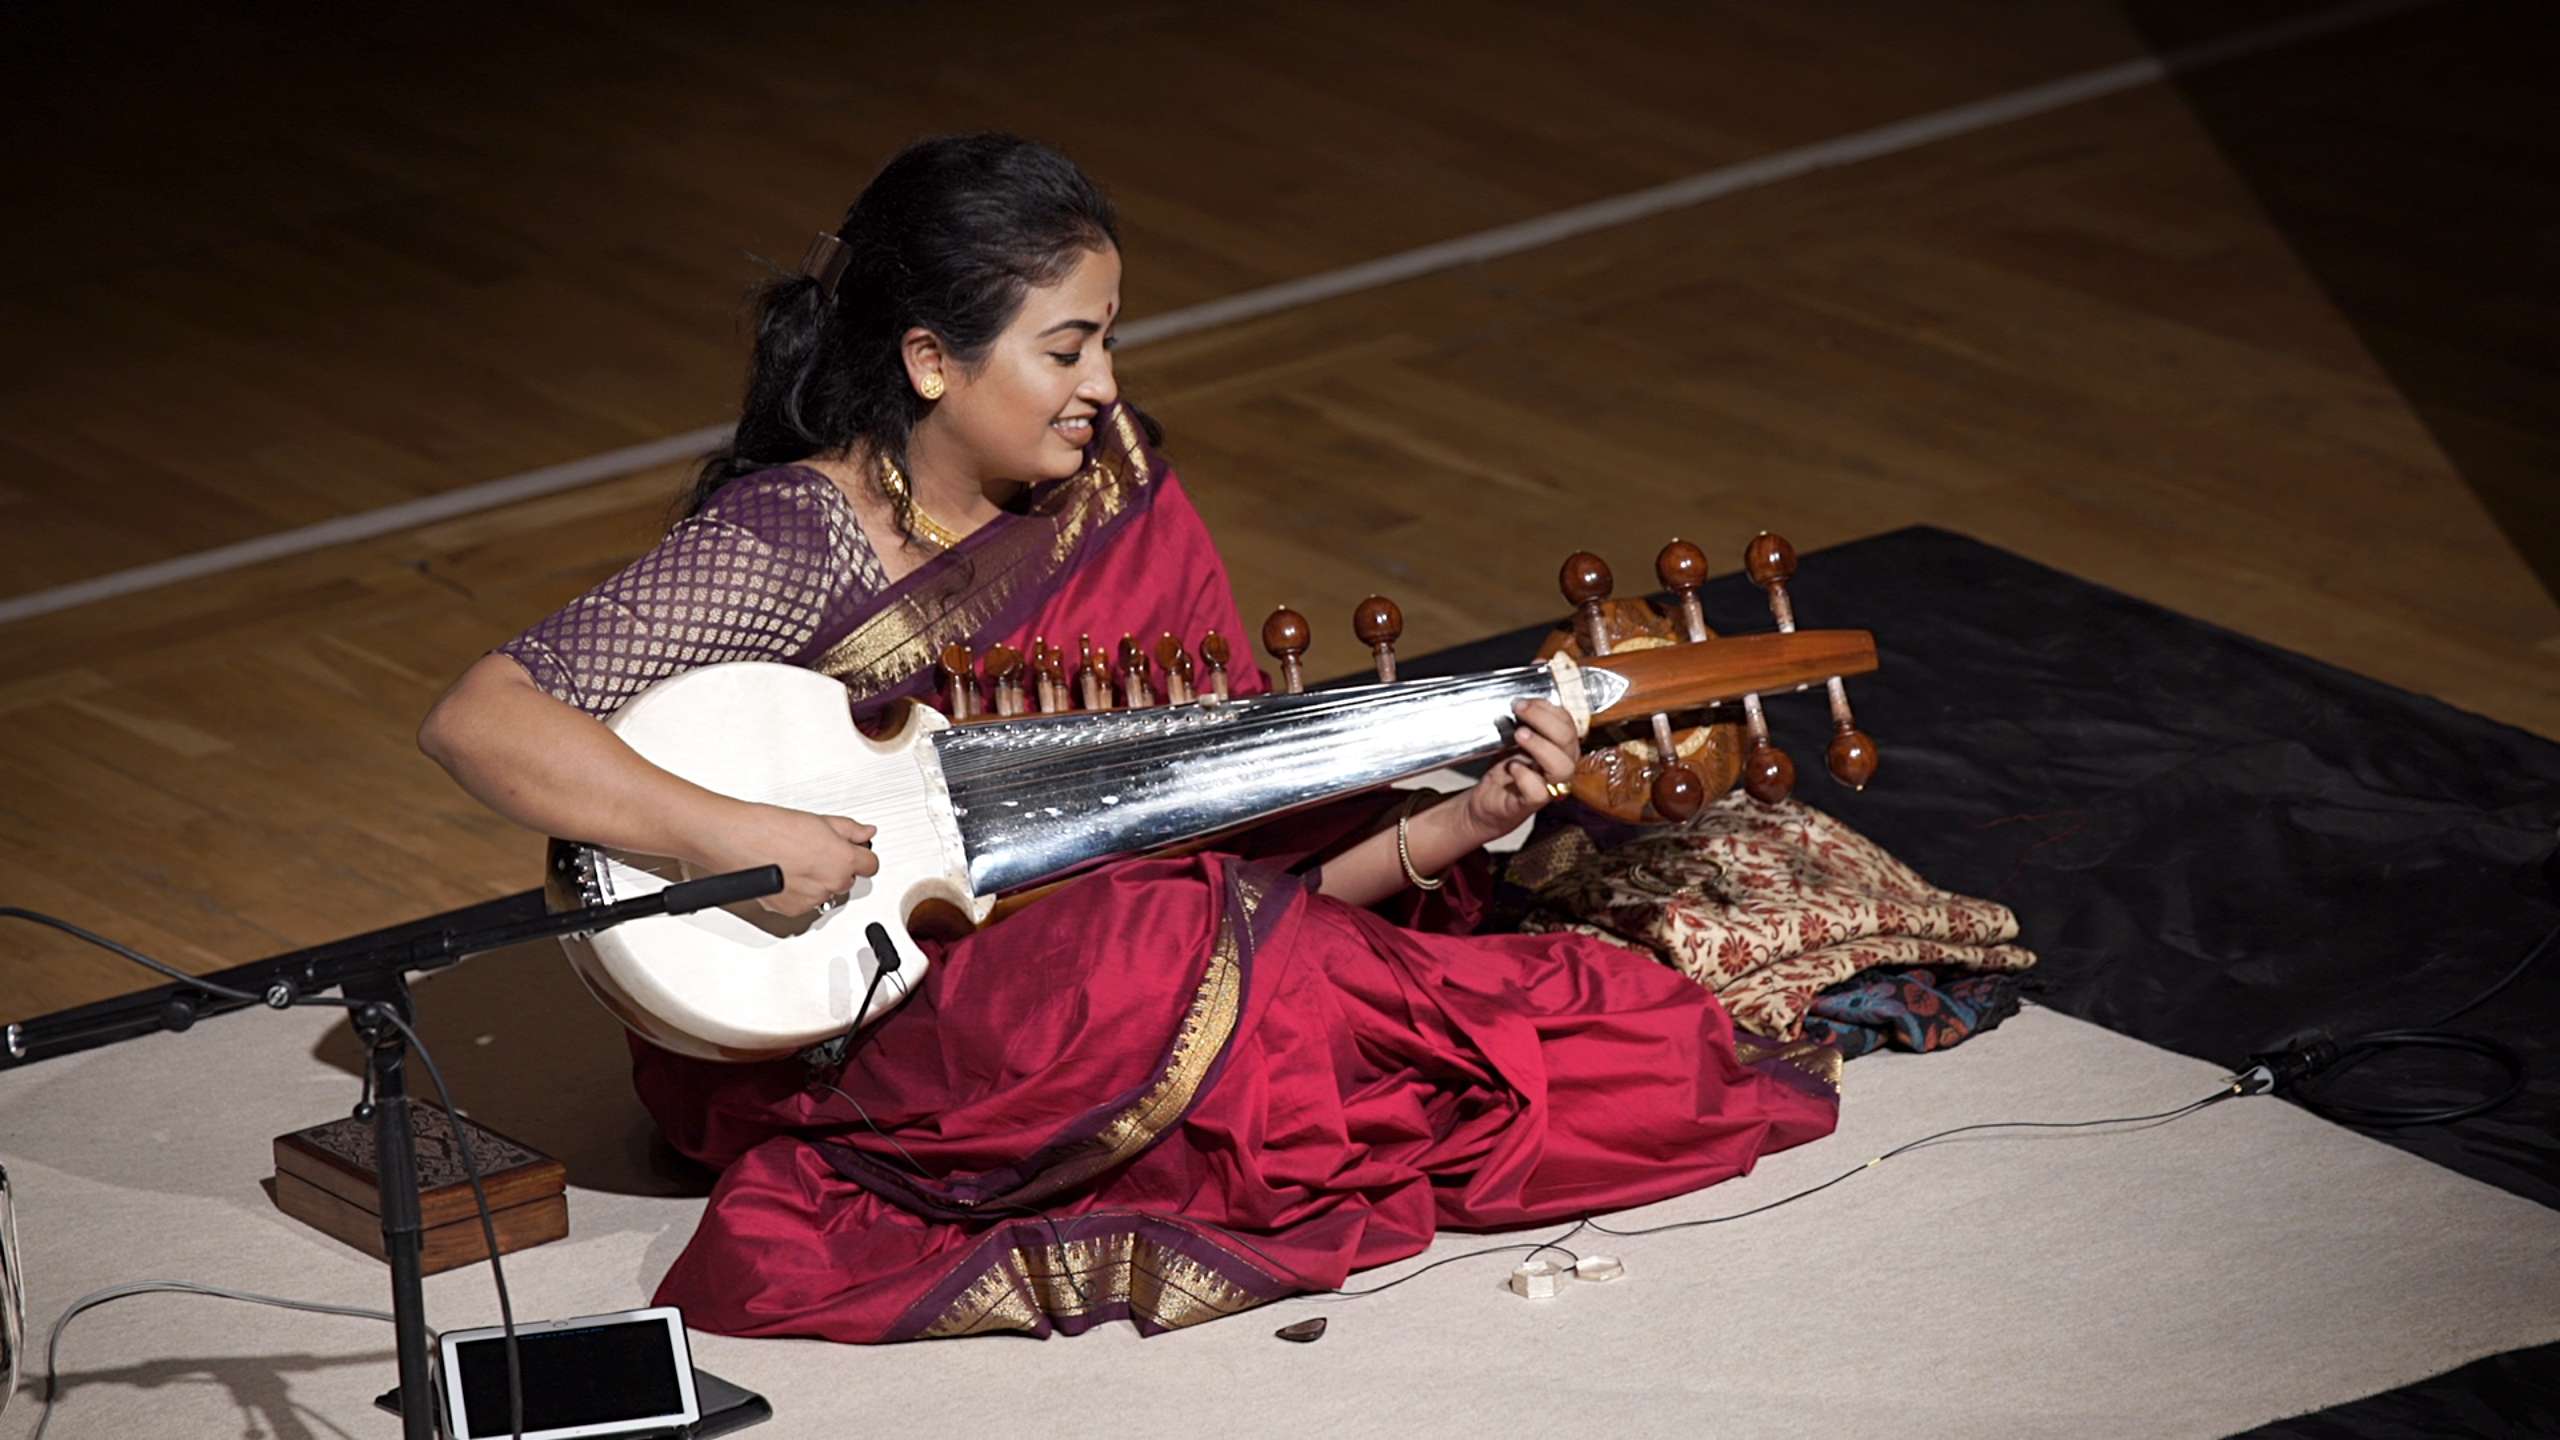 A photo taken from the balcony of Debasmita playing the sarod on stage at St George's.